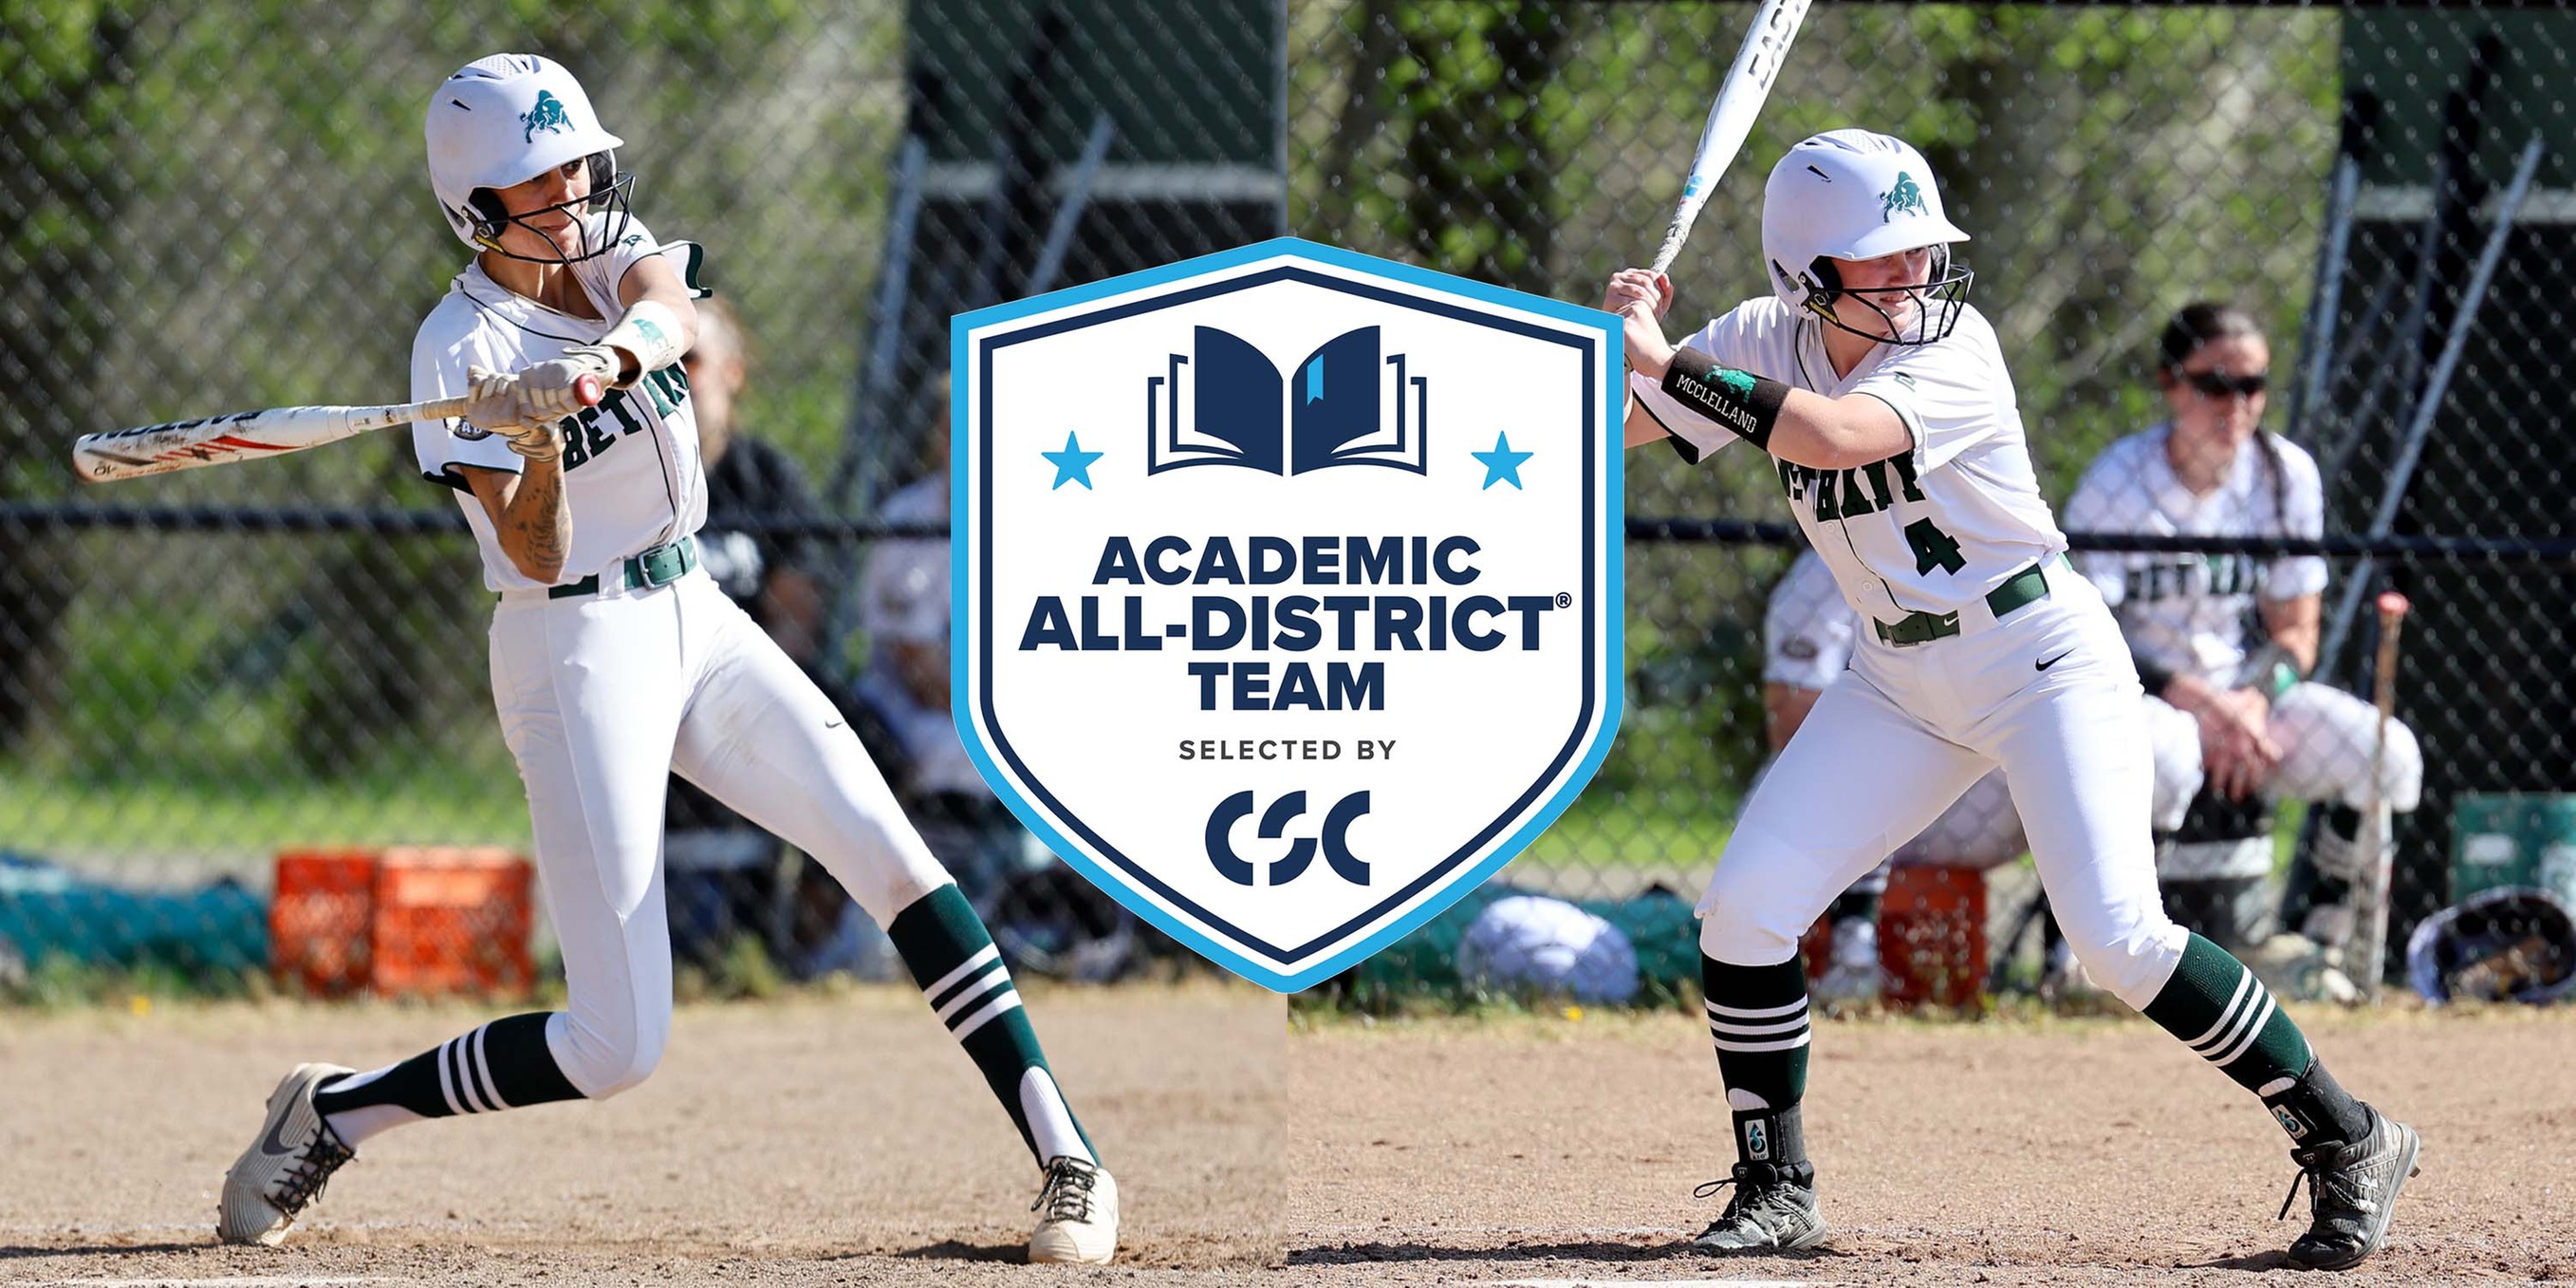 Softball: Goodnight and McClelland earn Academic All-District honors from College Sports Communicators